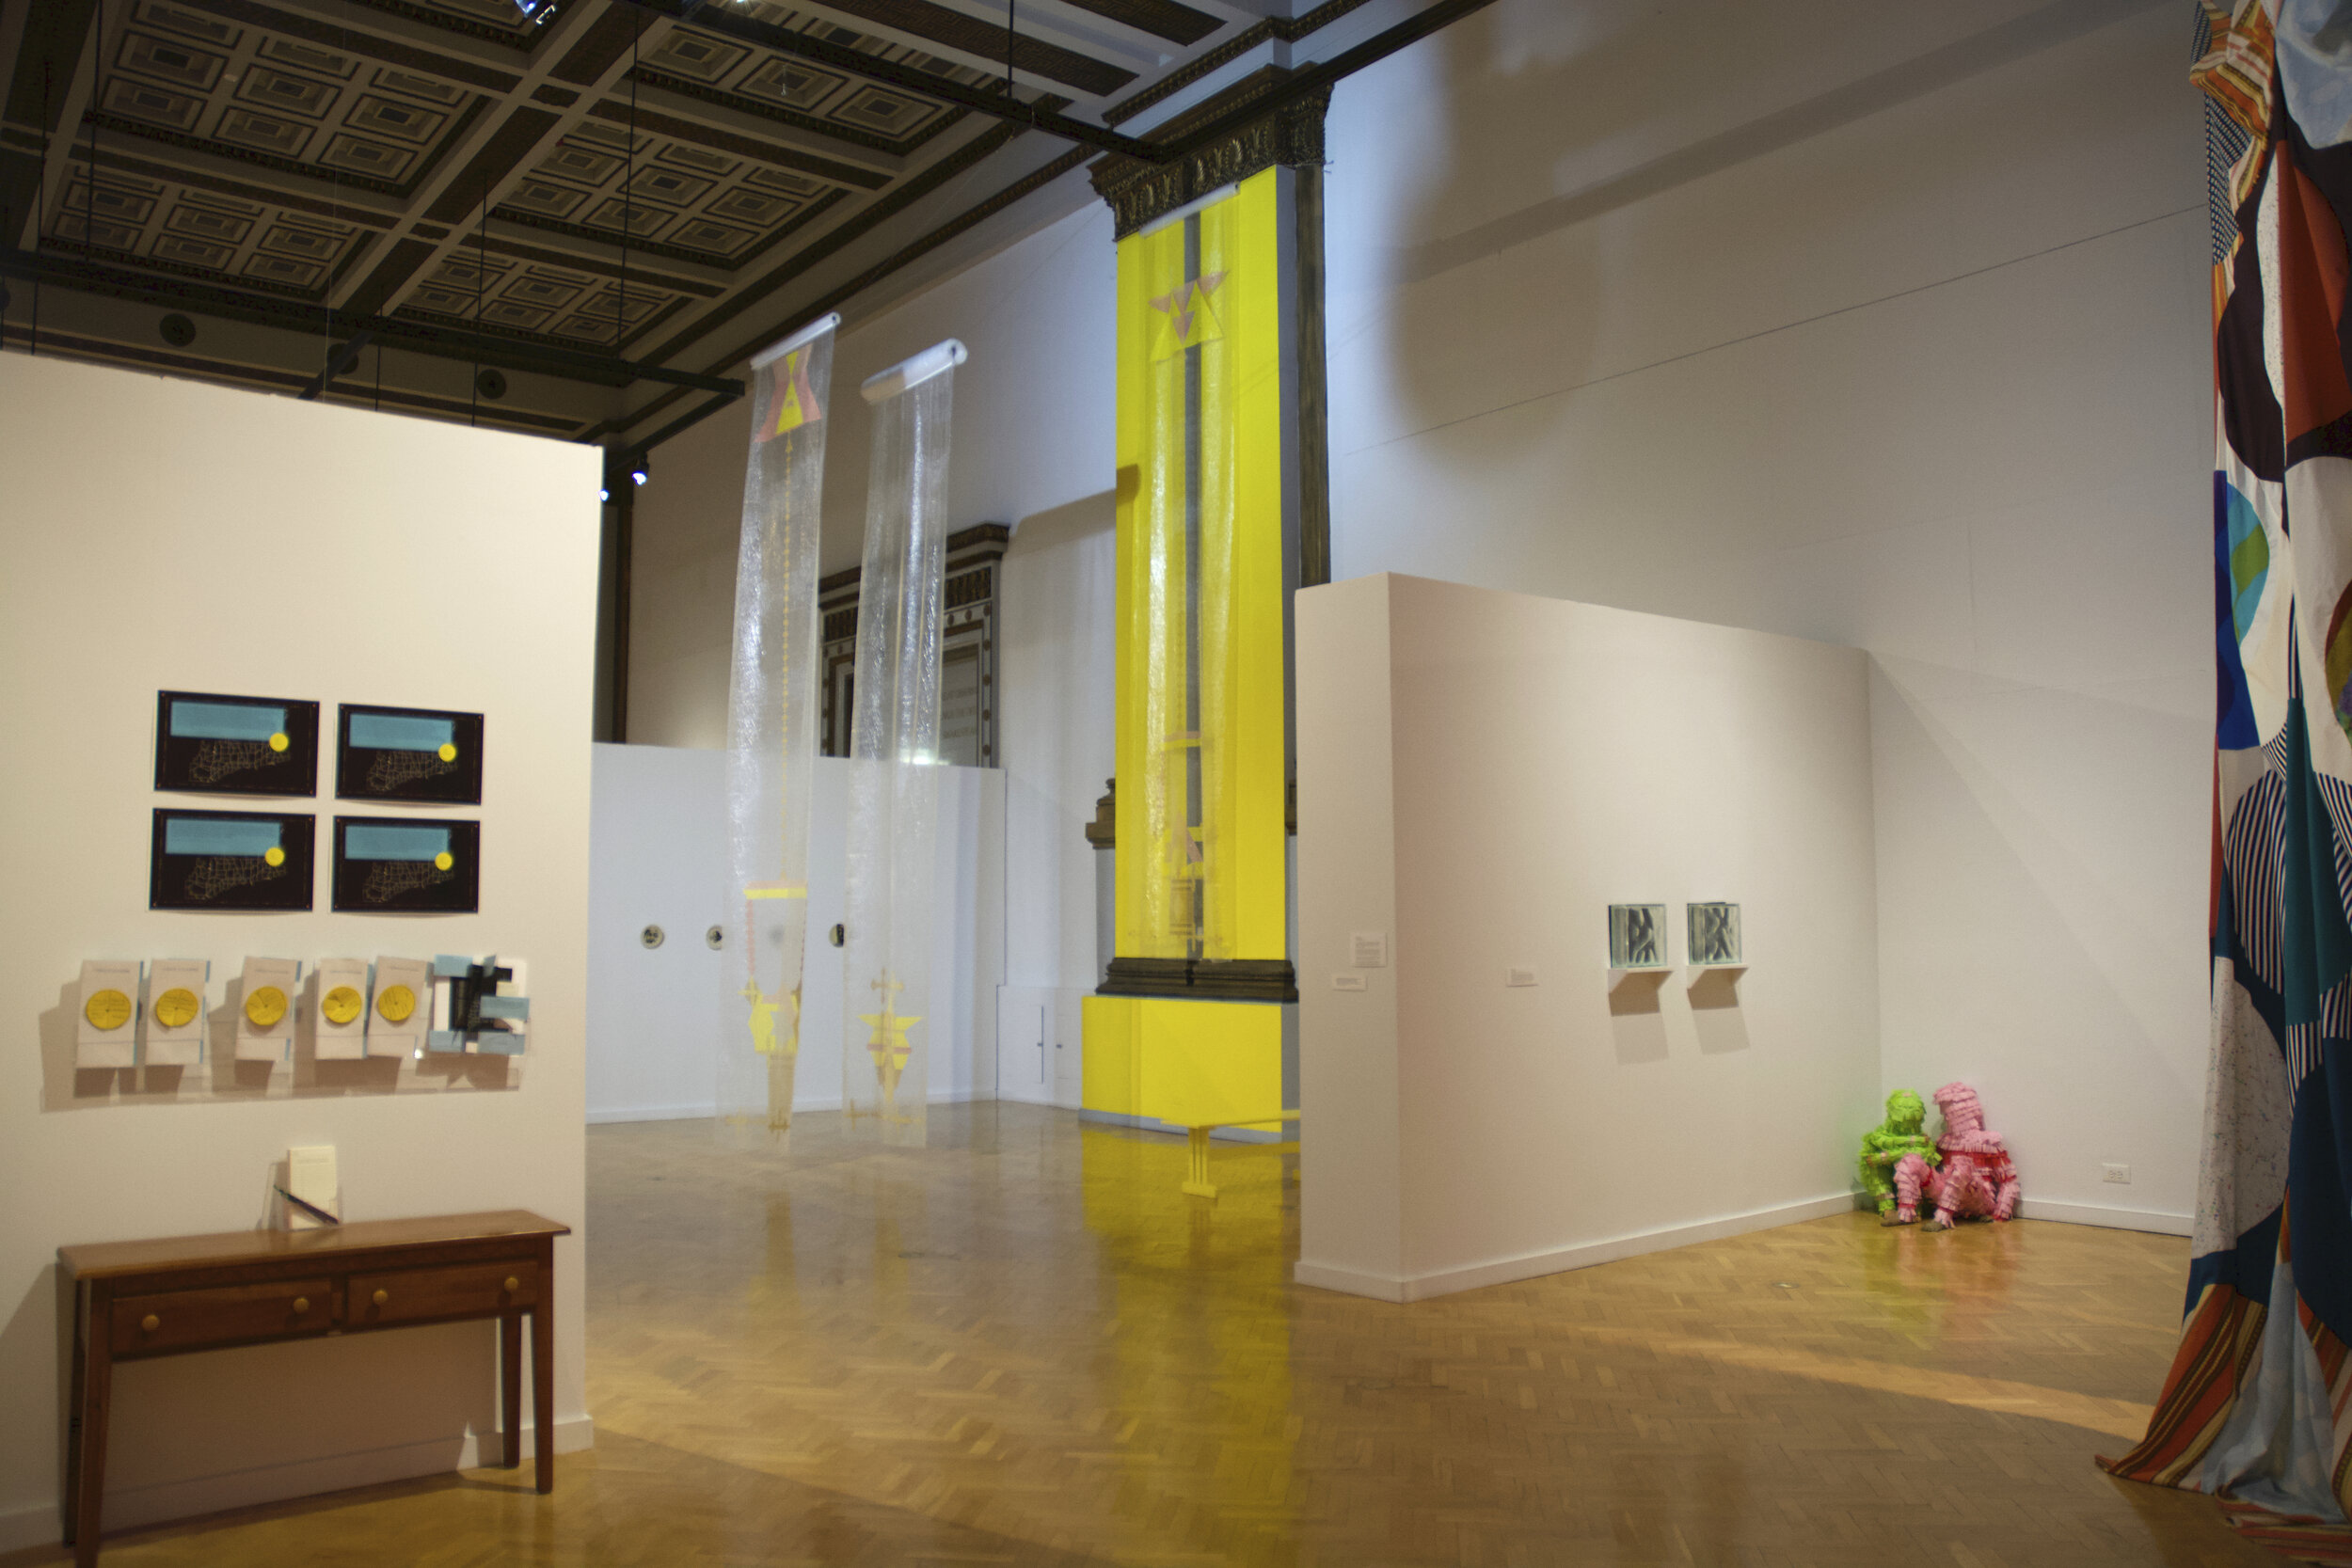  Installation view, left to right: Silvia Gonzalez with Joseph Josue Mora and Patricia Nguyen, Roni Packer, Sherwin Ovid, Moises Salazar. 